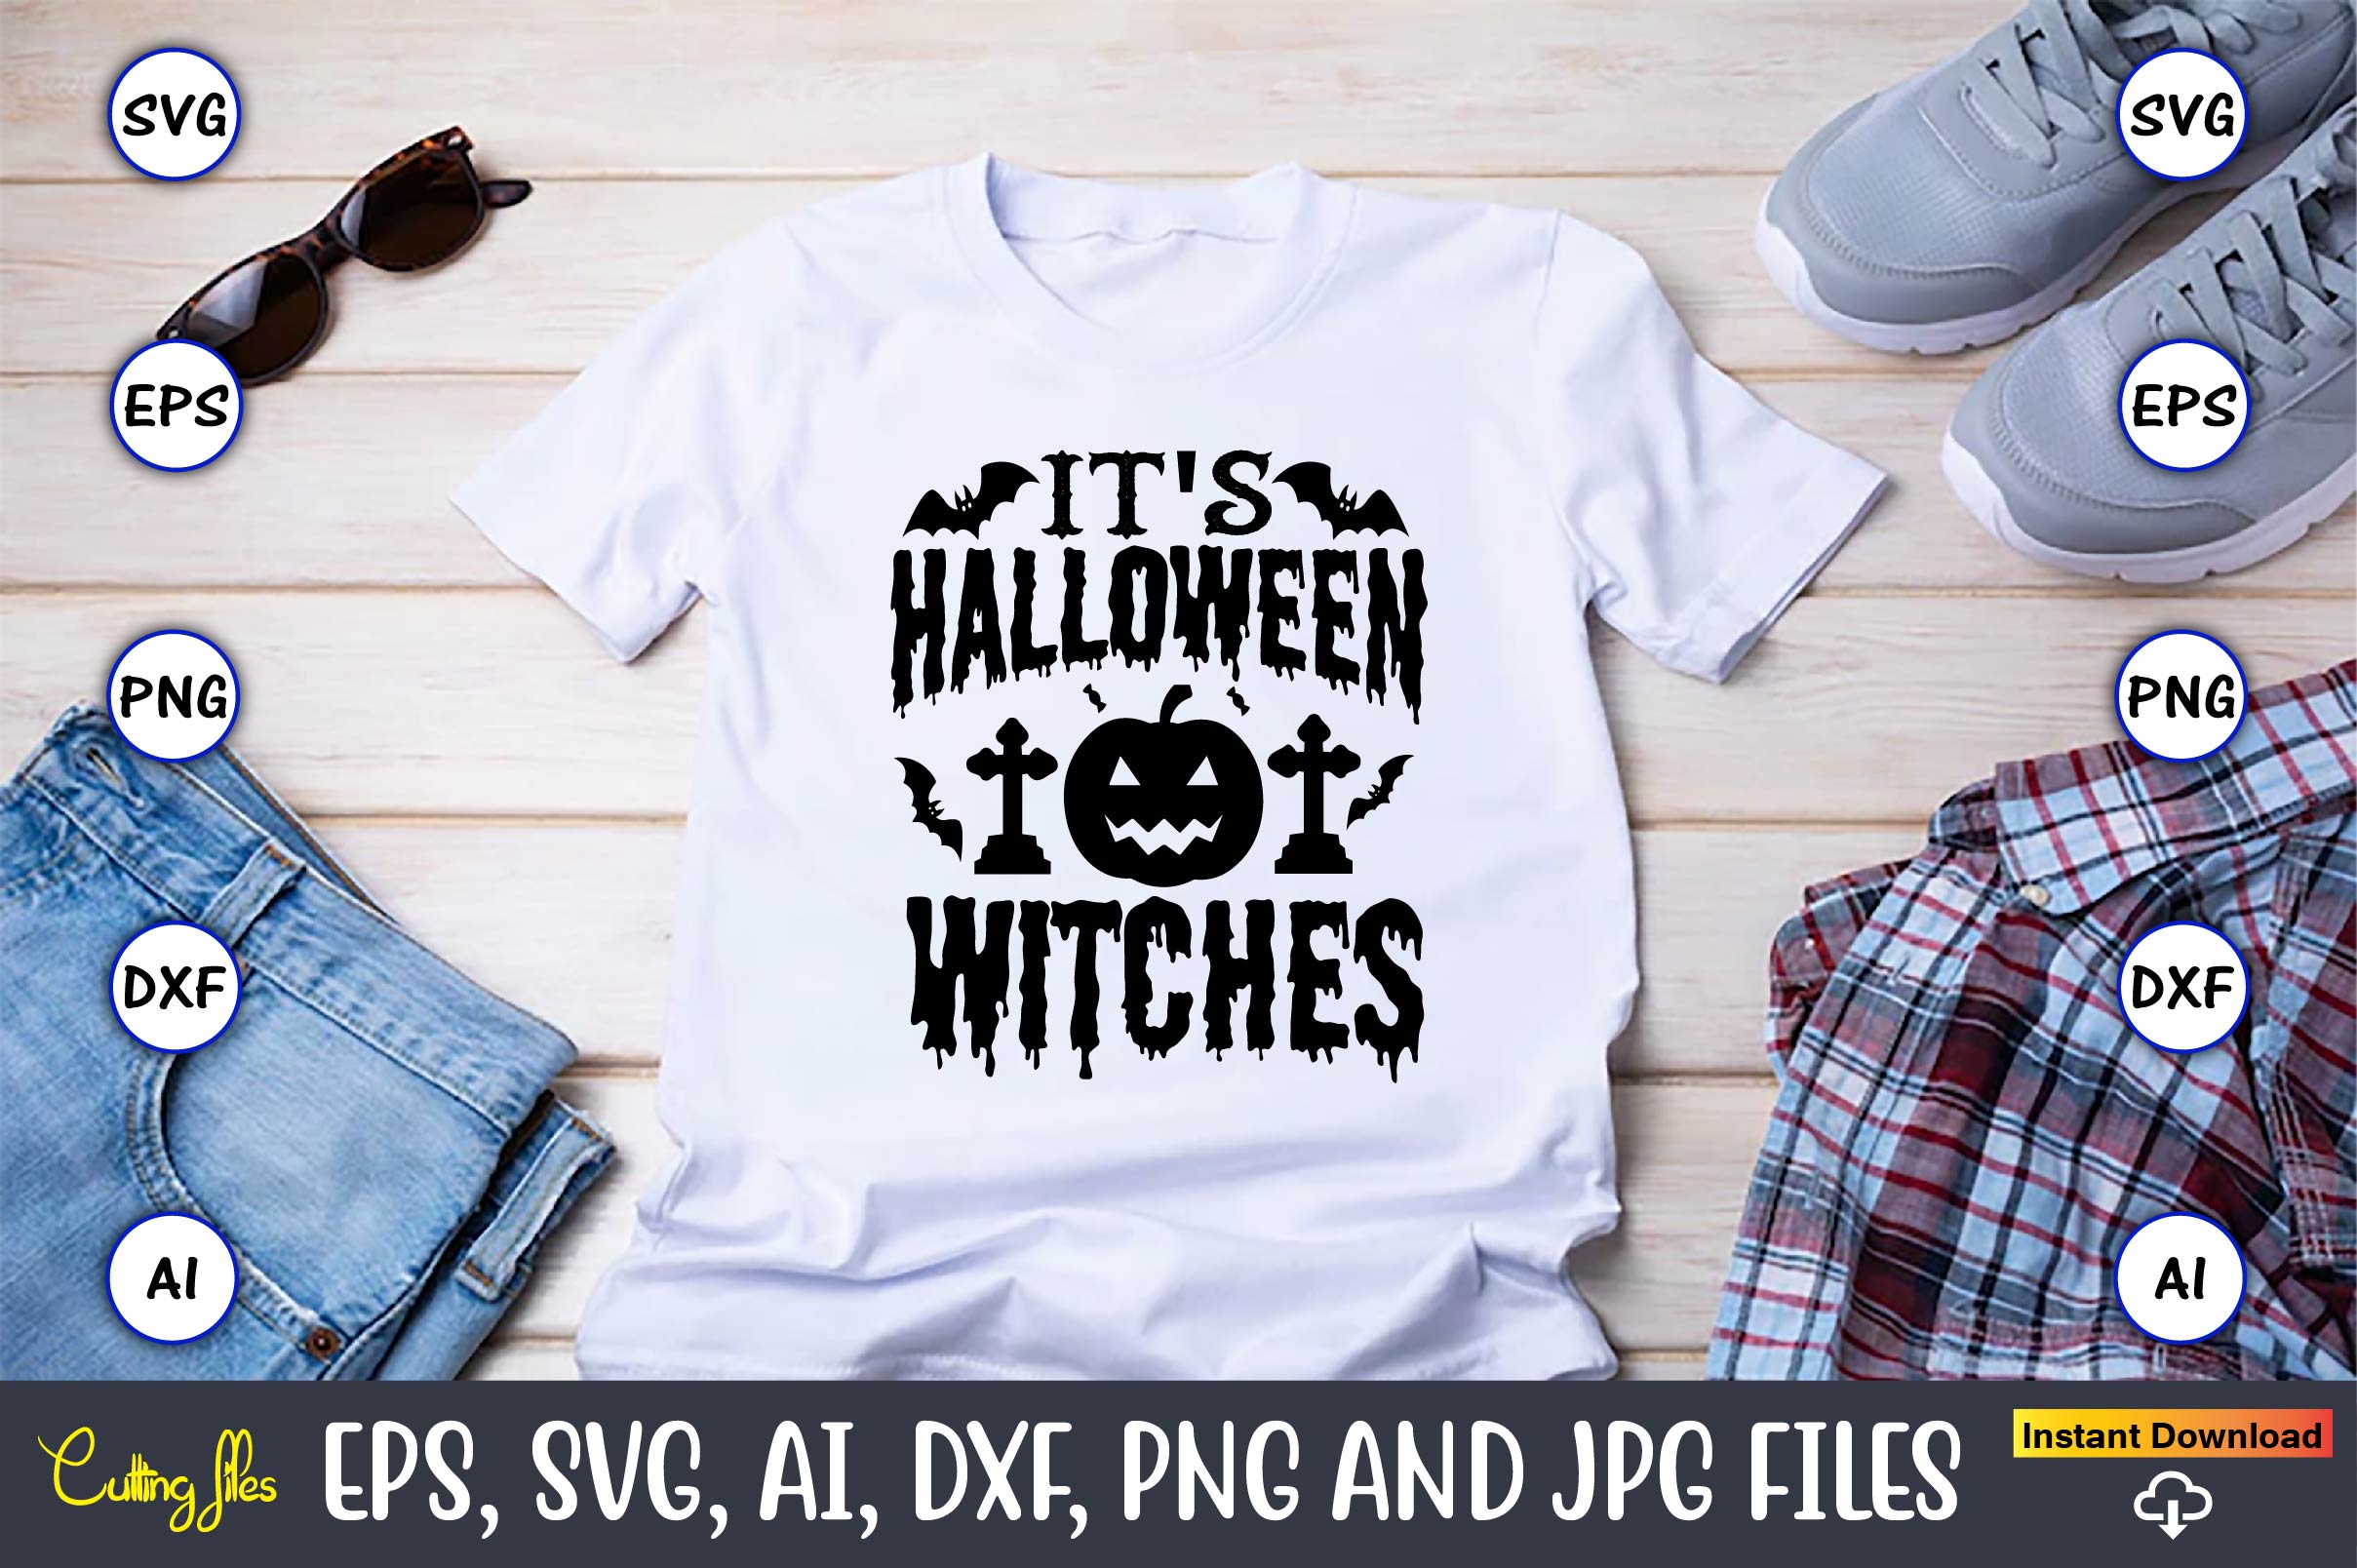 Halloween Witches SVG T-Shirt Design Bundle preview image.